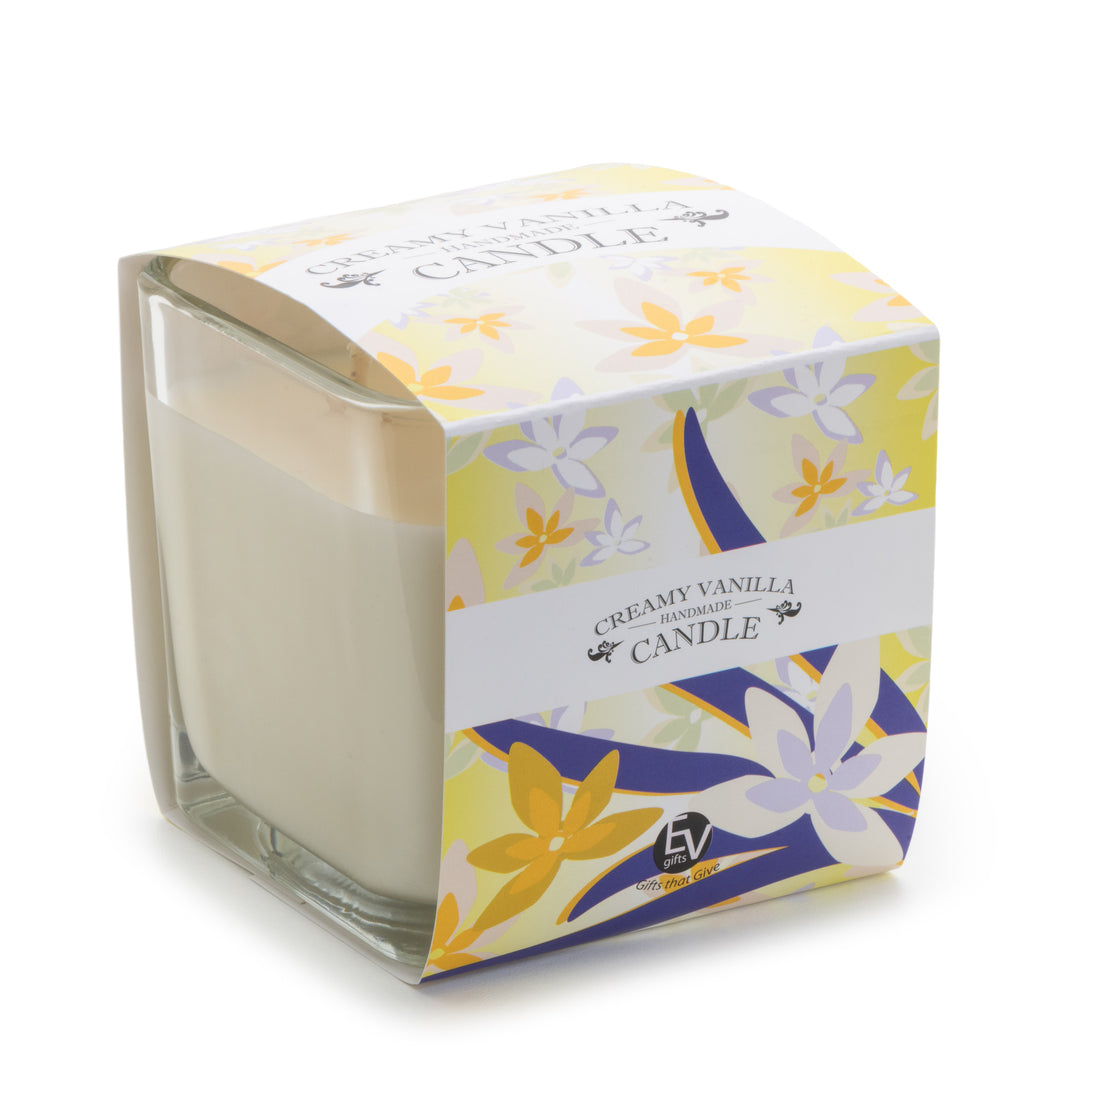 Creamy Vanilla Soy Candle, Double Wick